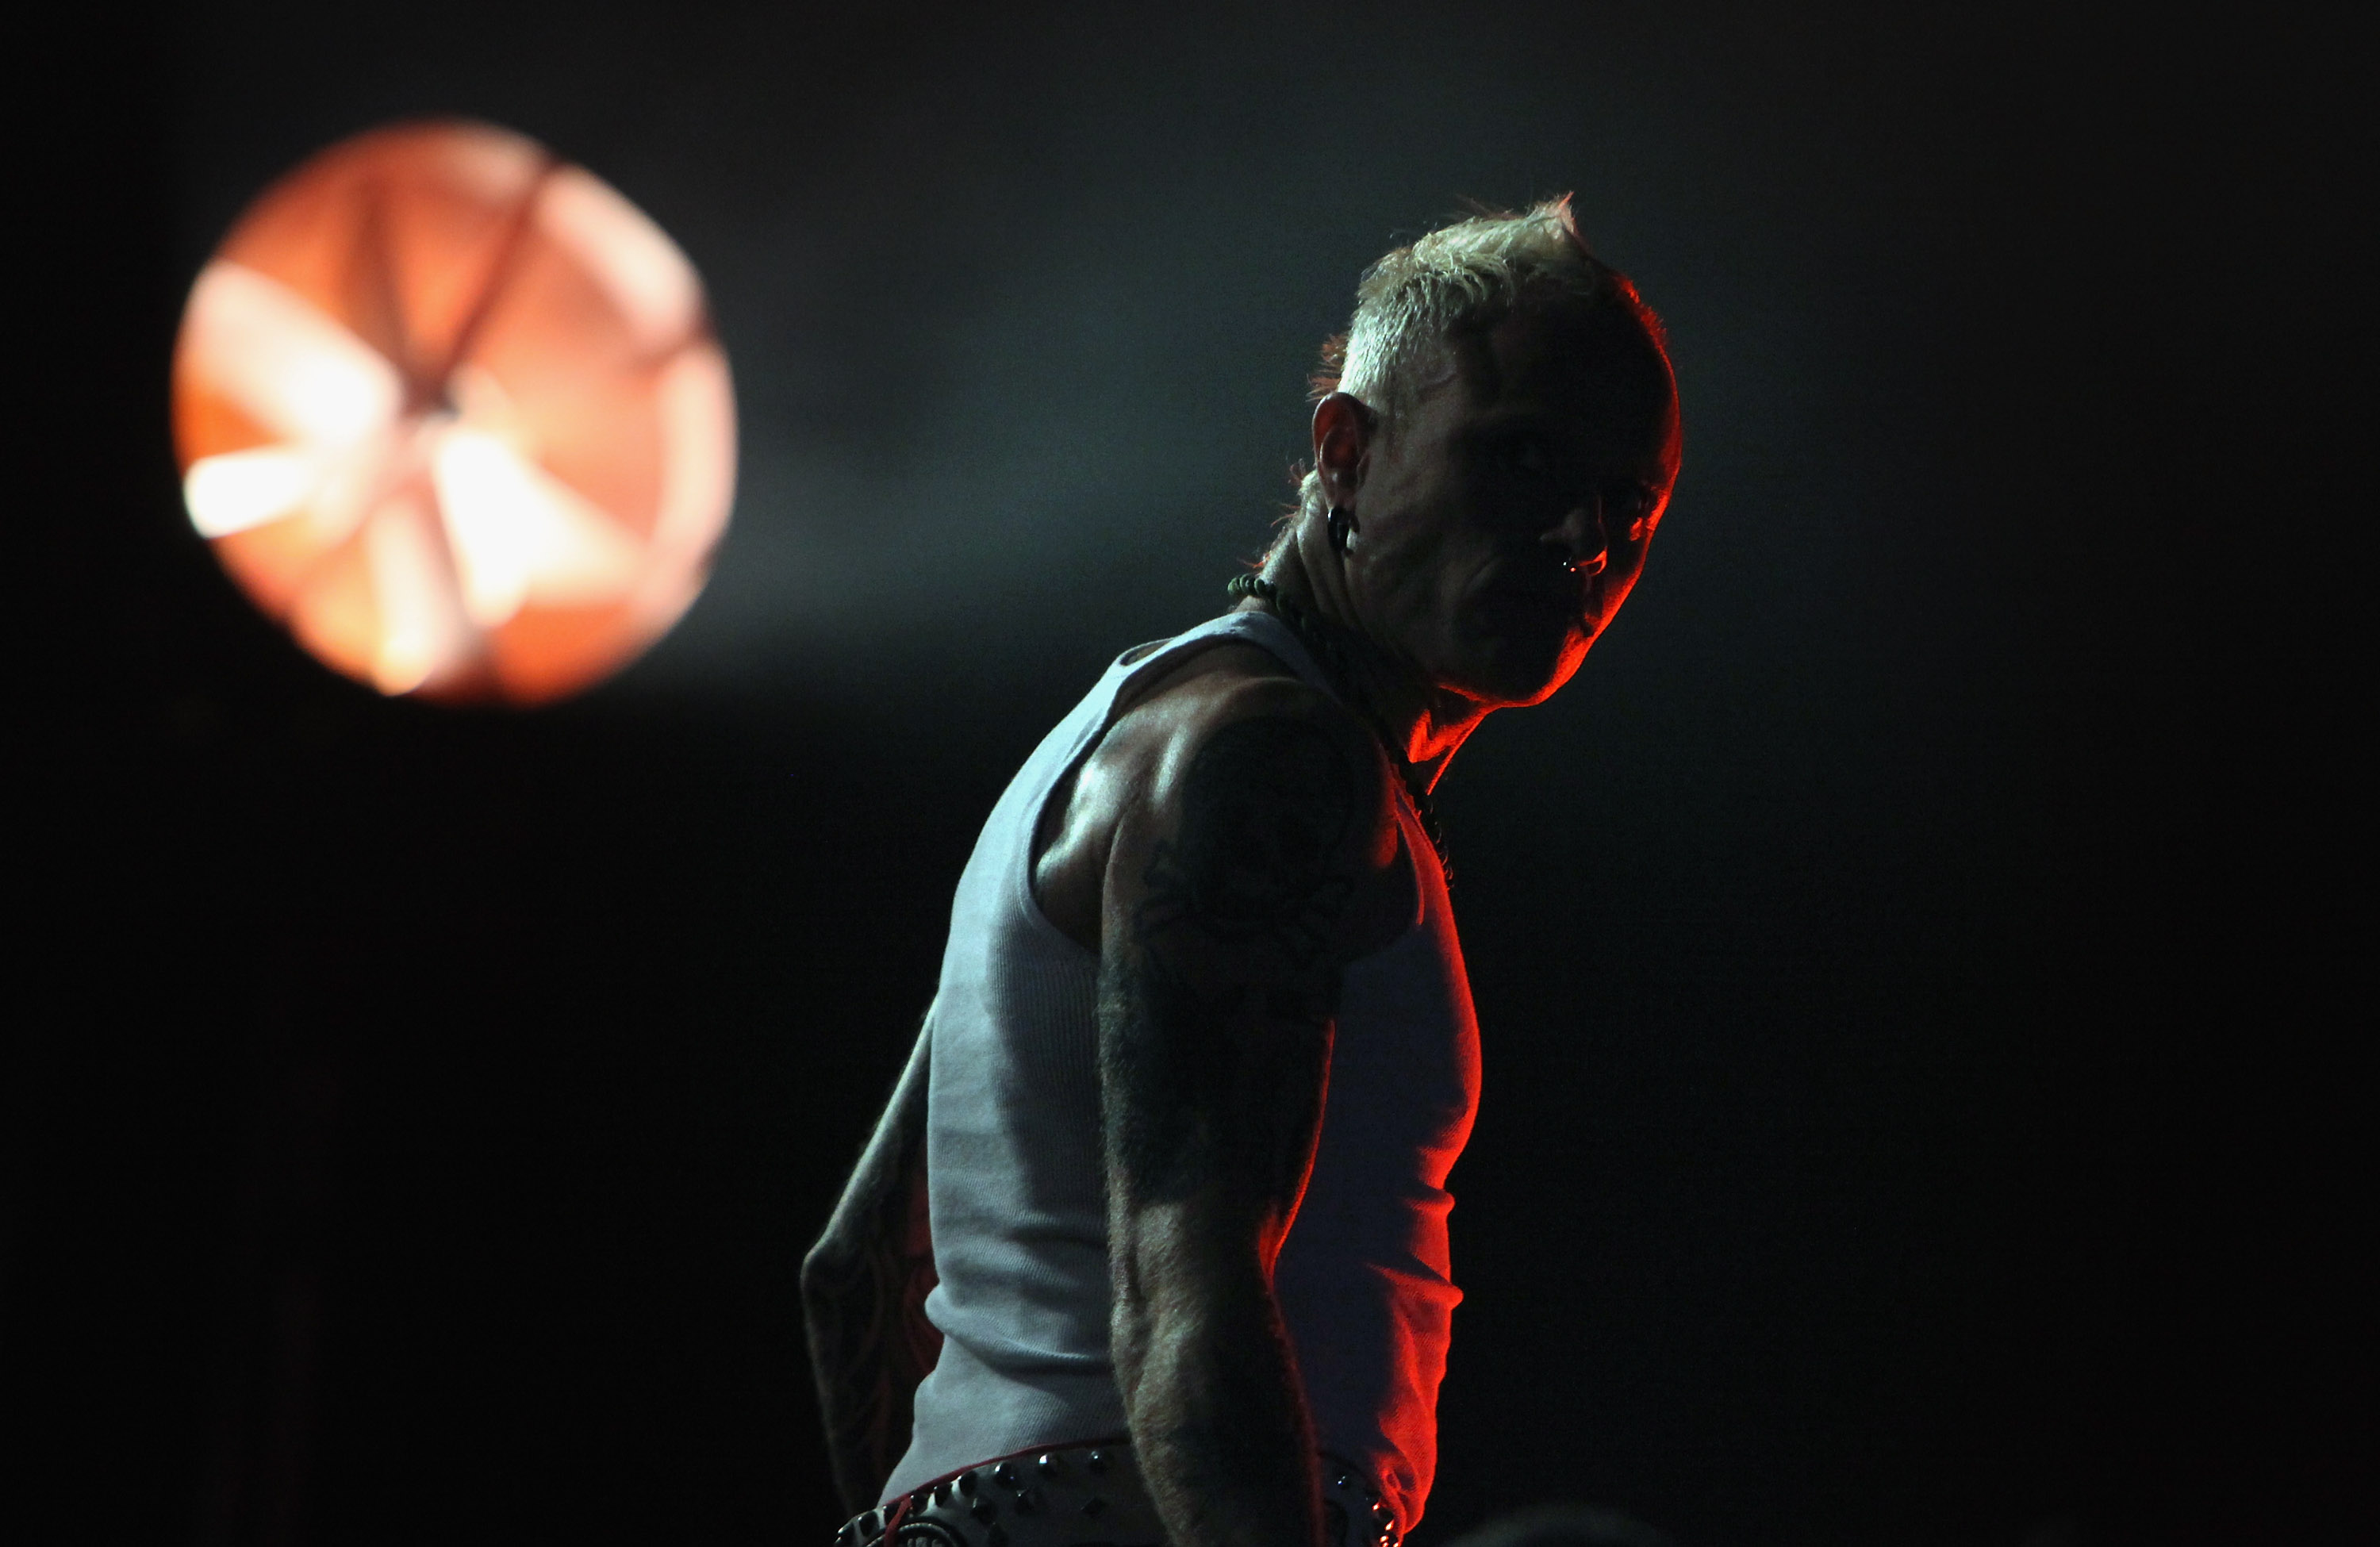 The Prodigy to Receive Full-Length Documentary Treatment